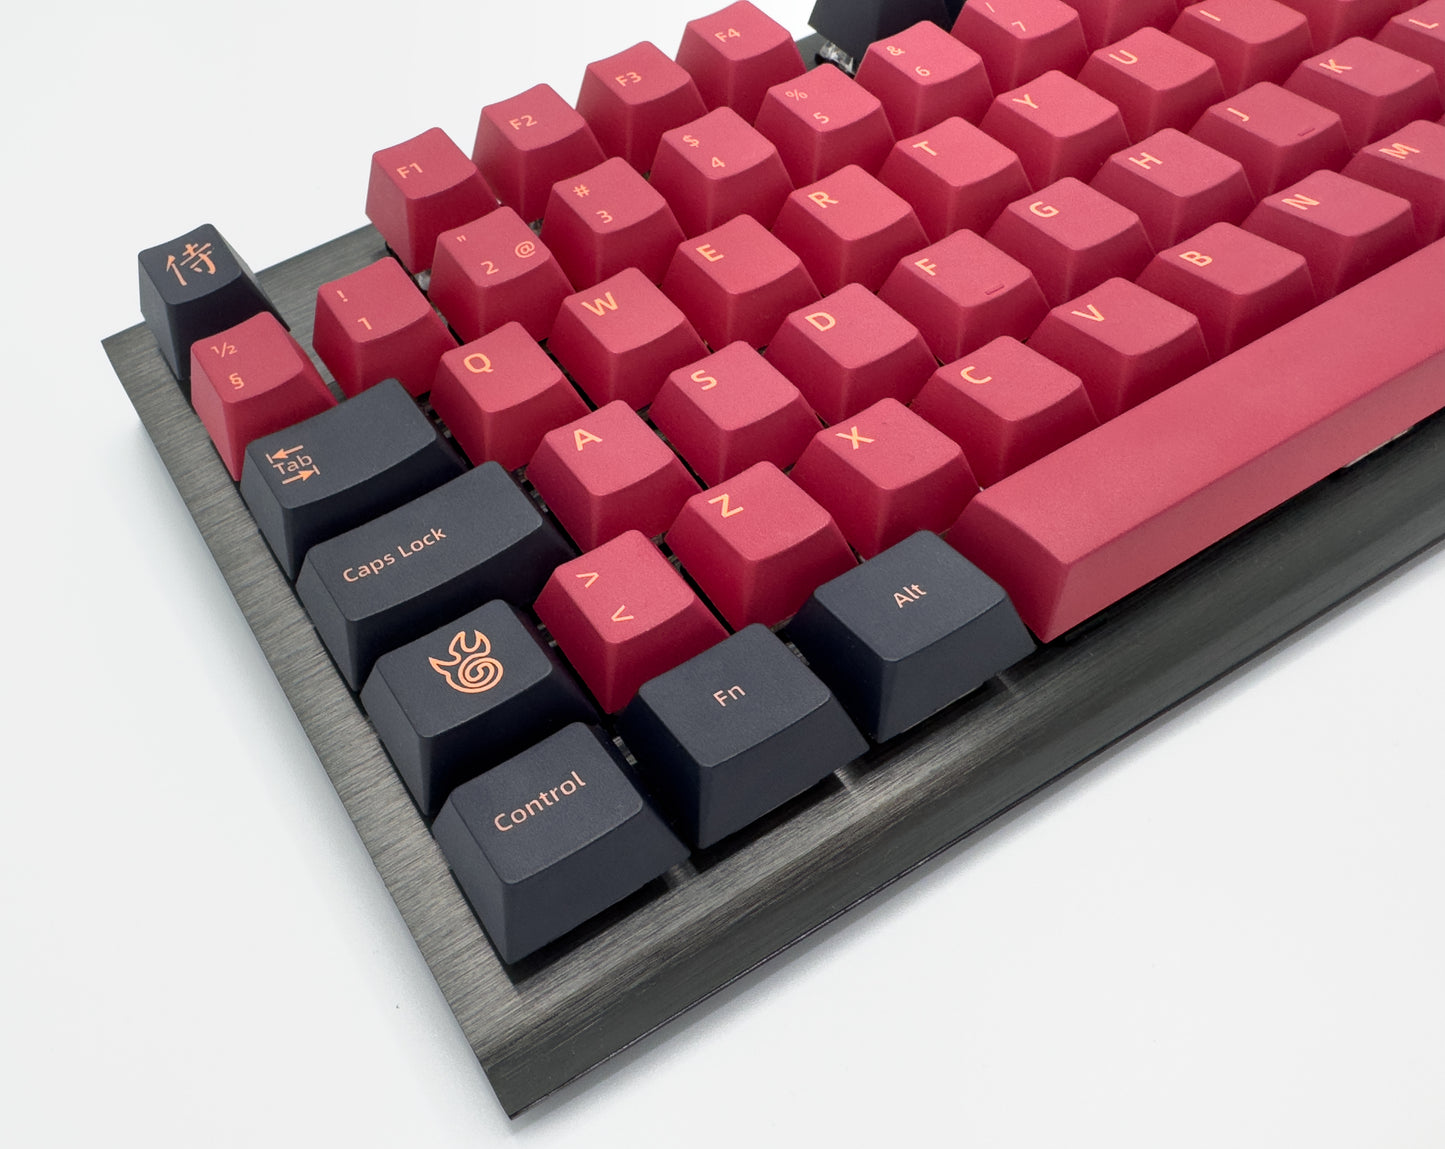 The red samurai keyboard keycap set features red keys with yellow and black accents